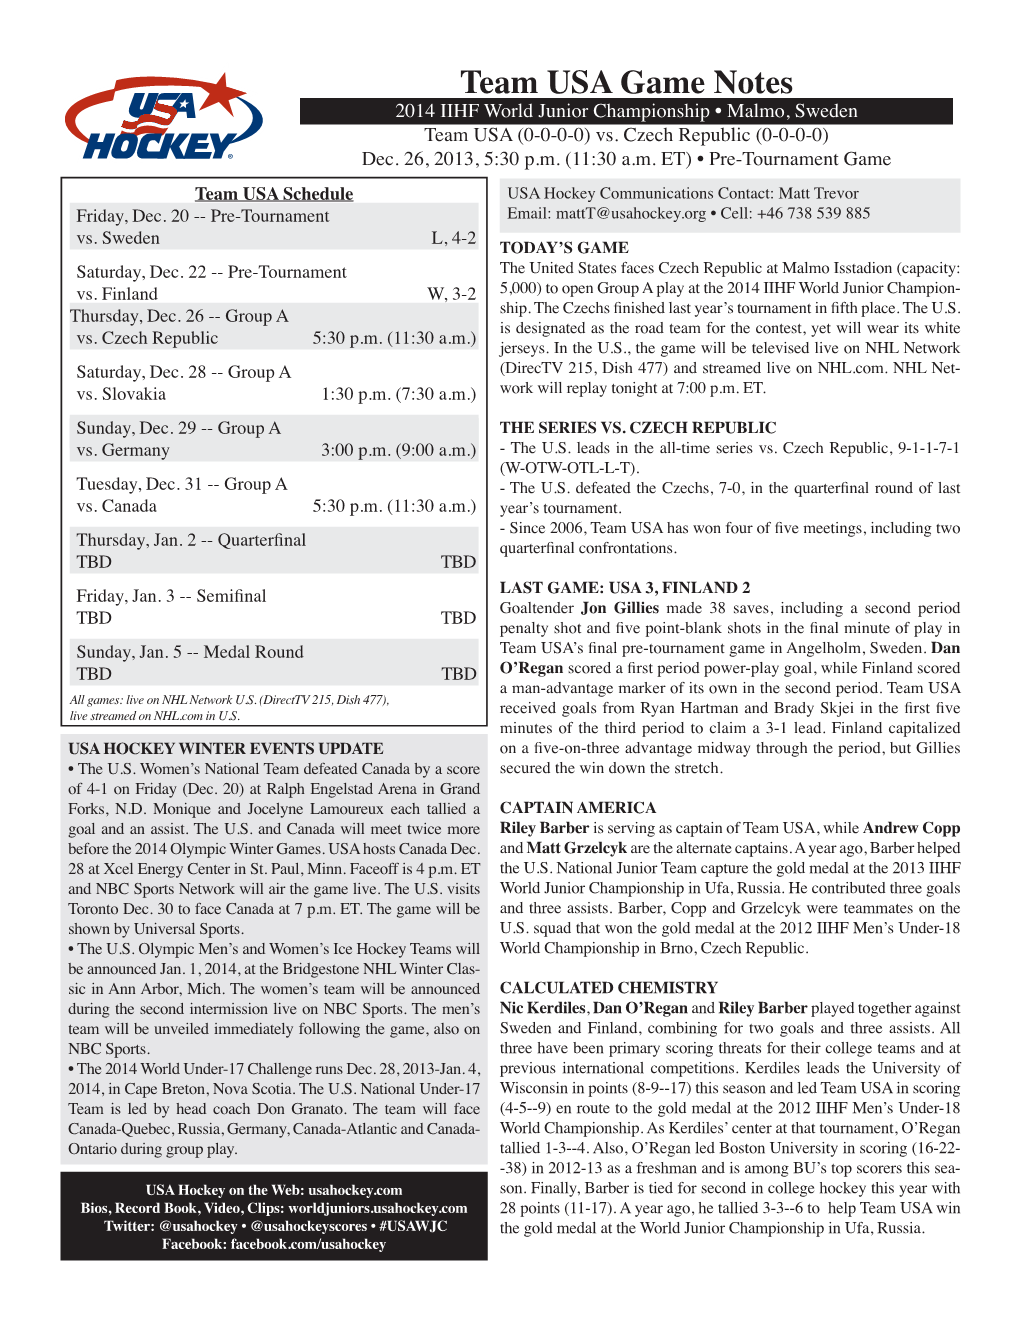 Game Notes-Czech Republic.Indd